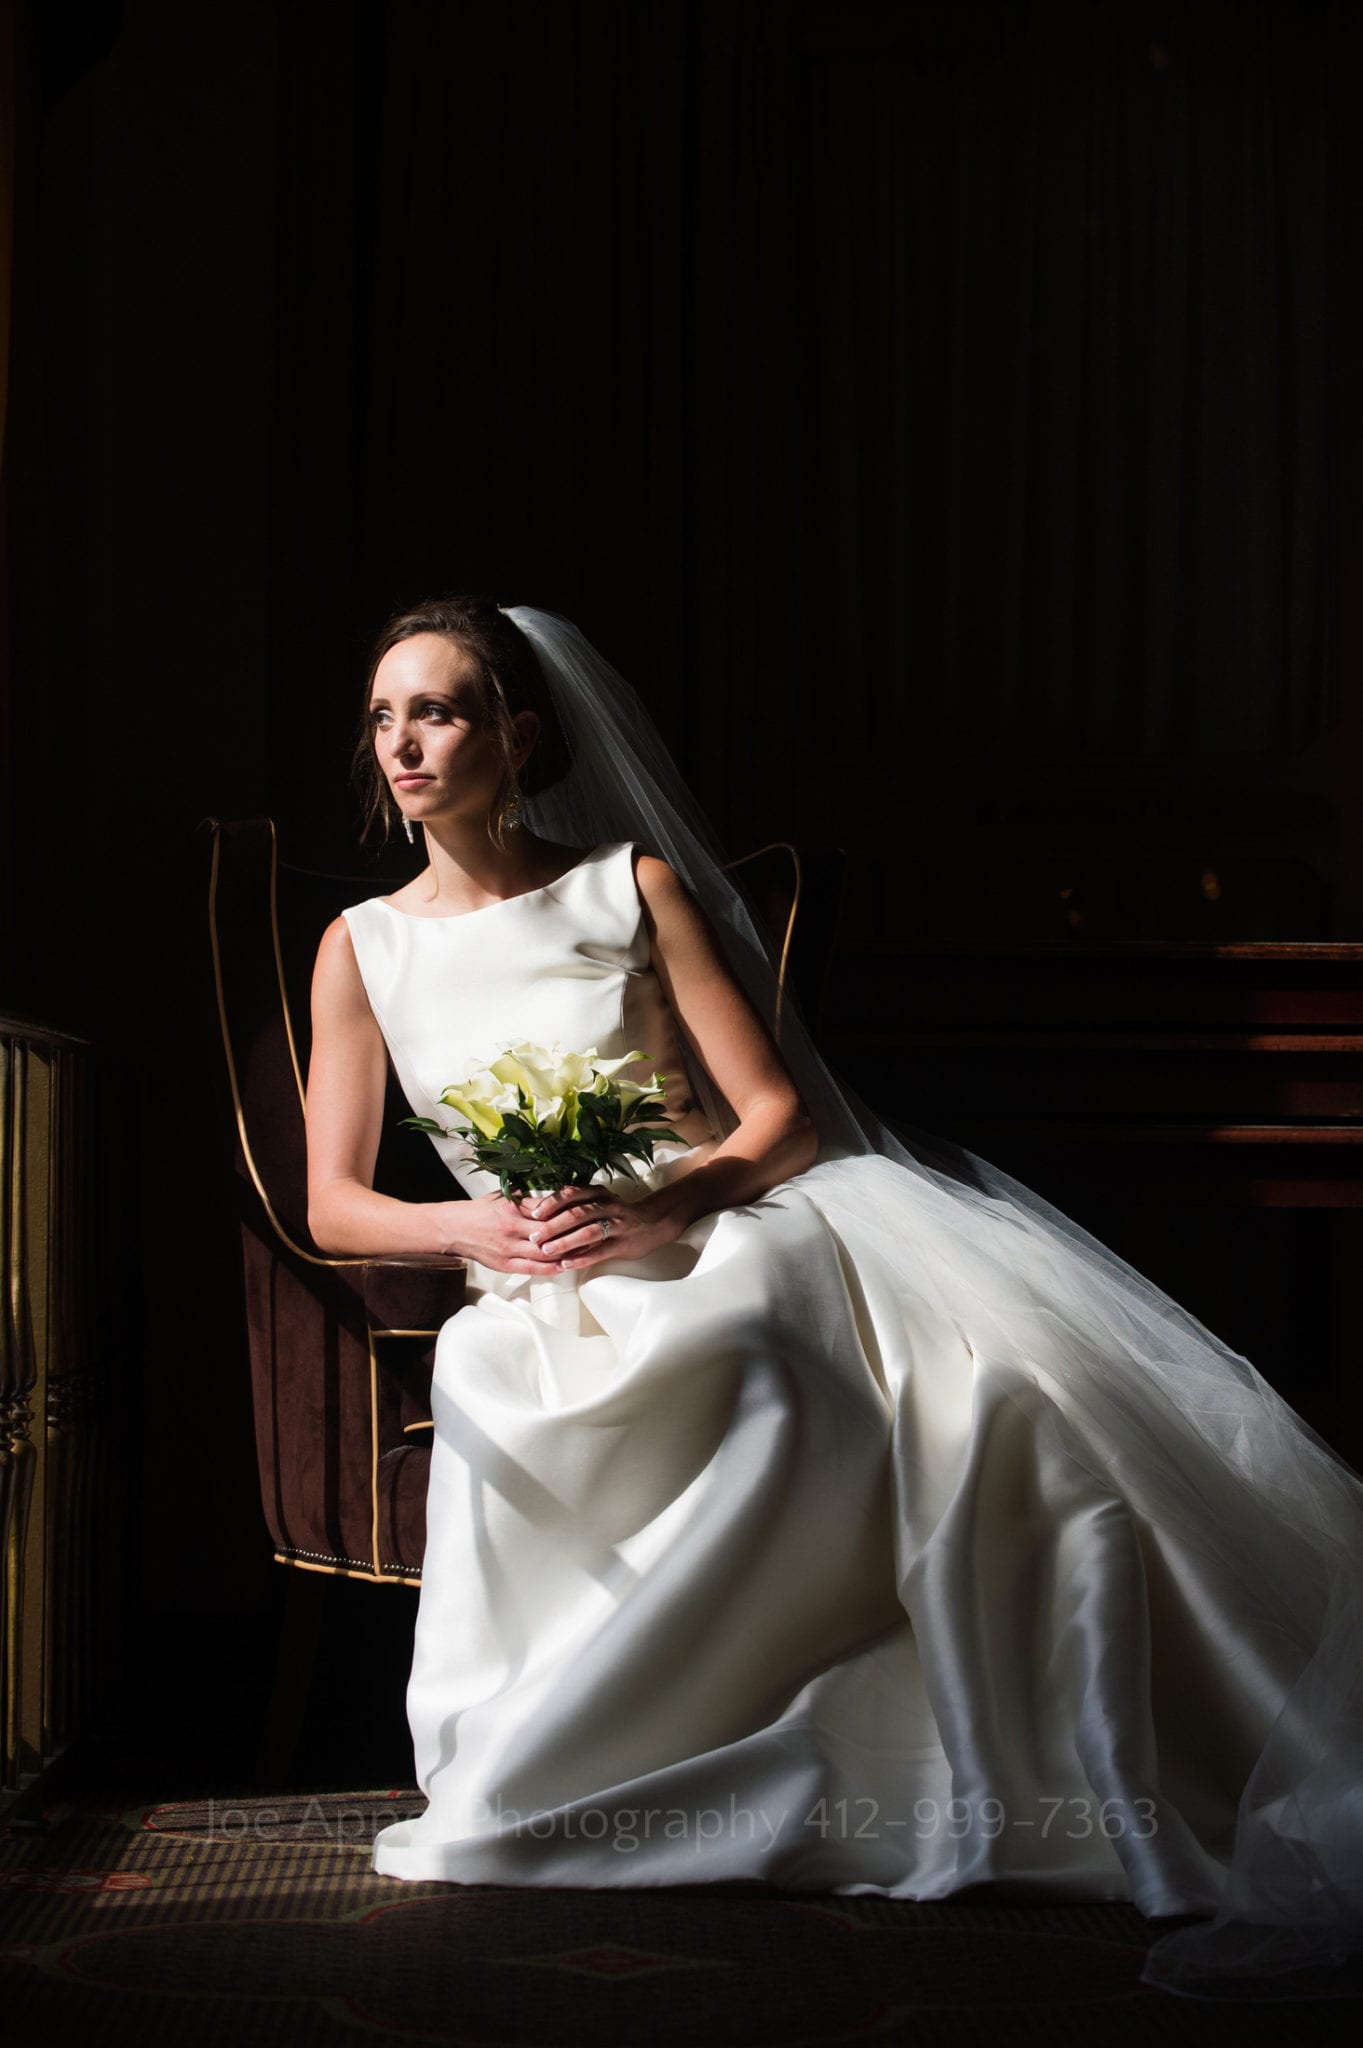 a bride with a white bouquet sits in a maroon arm chair and gazes out of the window